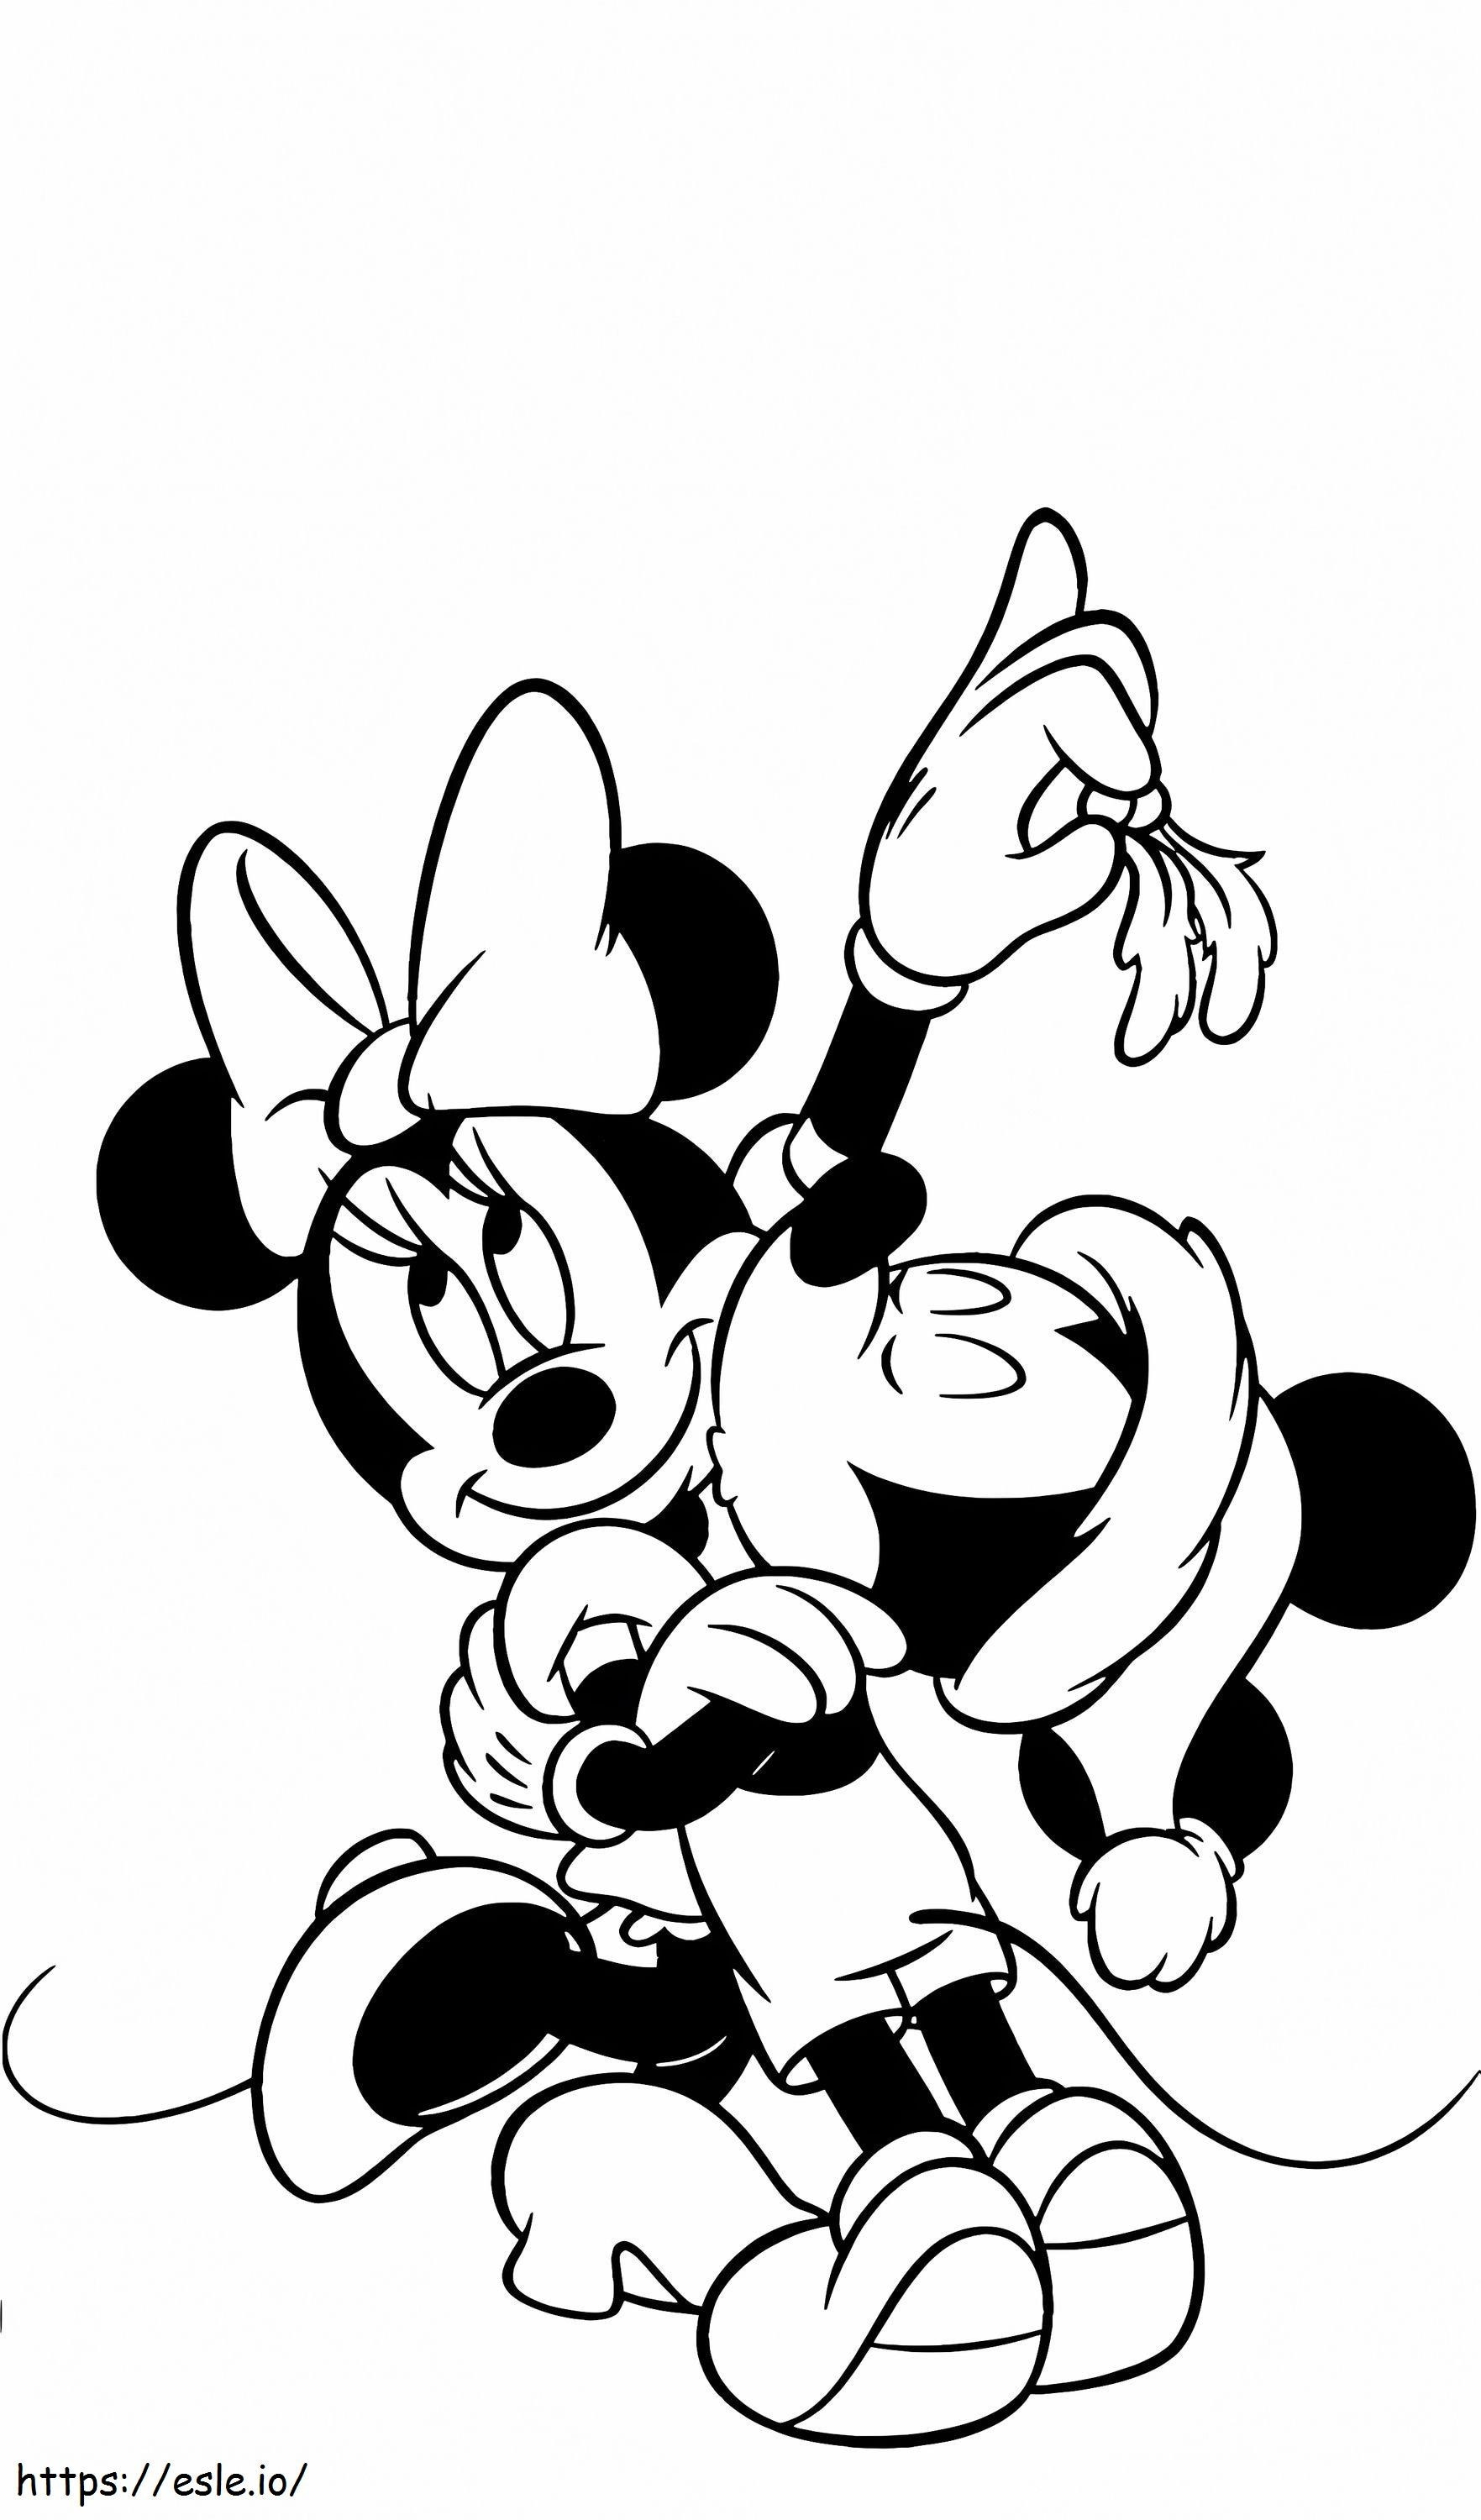 Mickey Beso Minnie Mouse coloring page